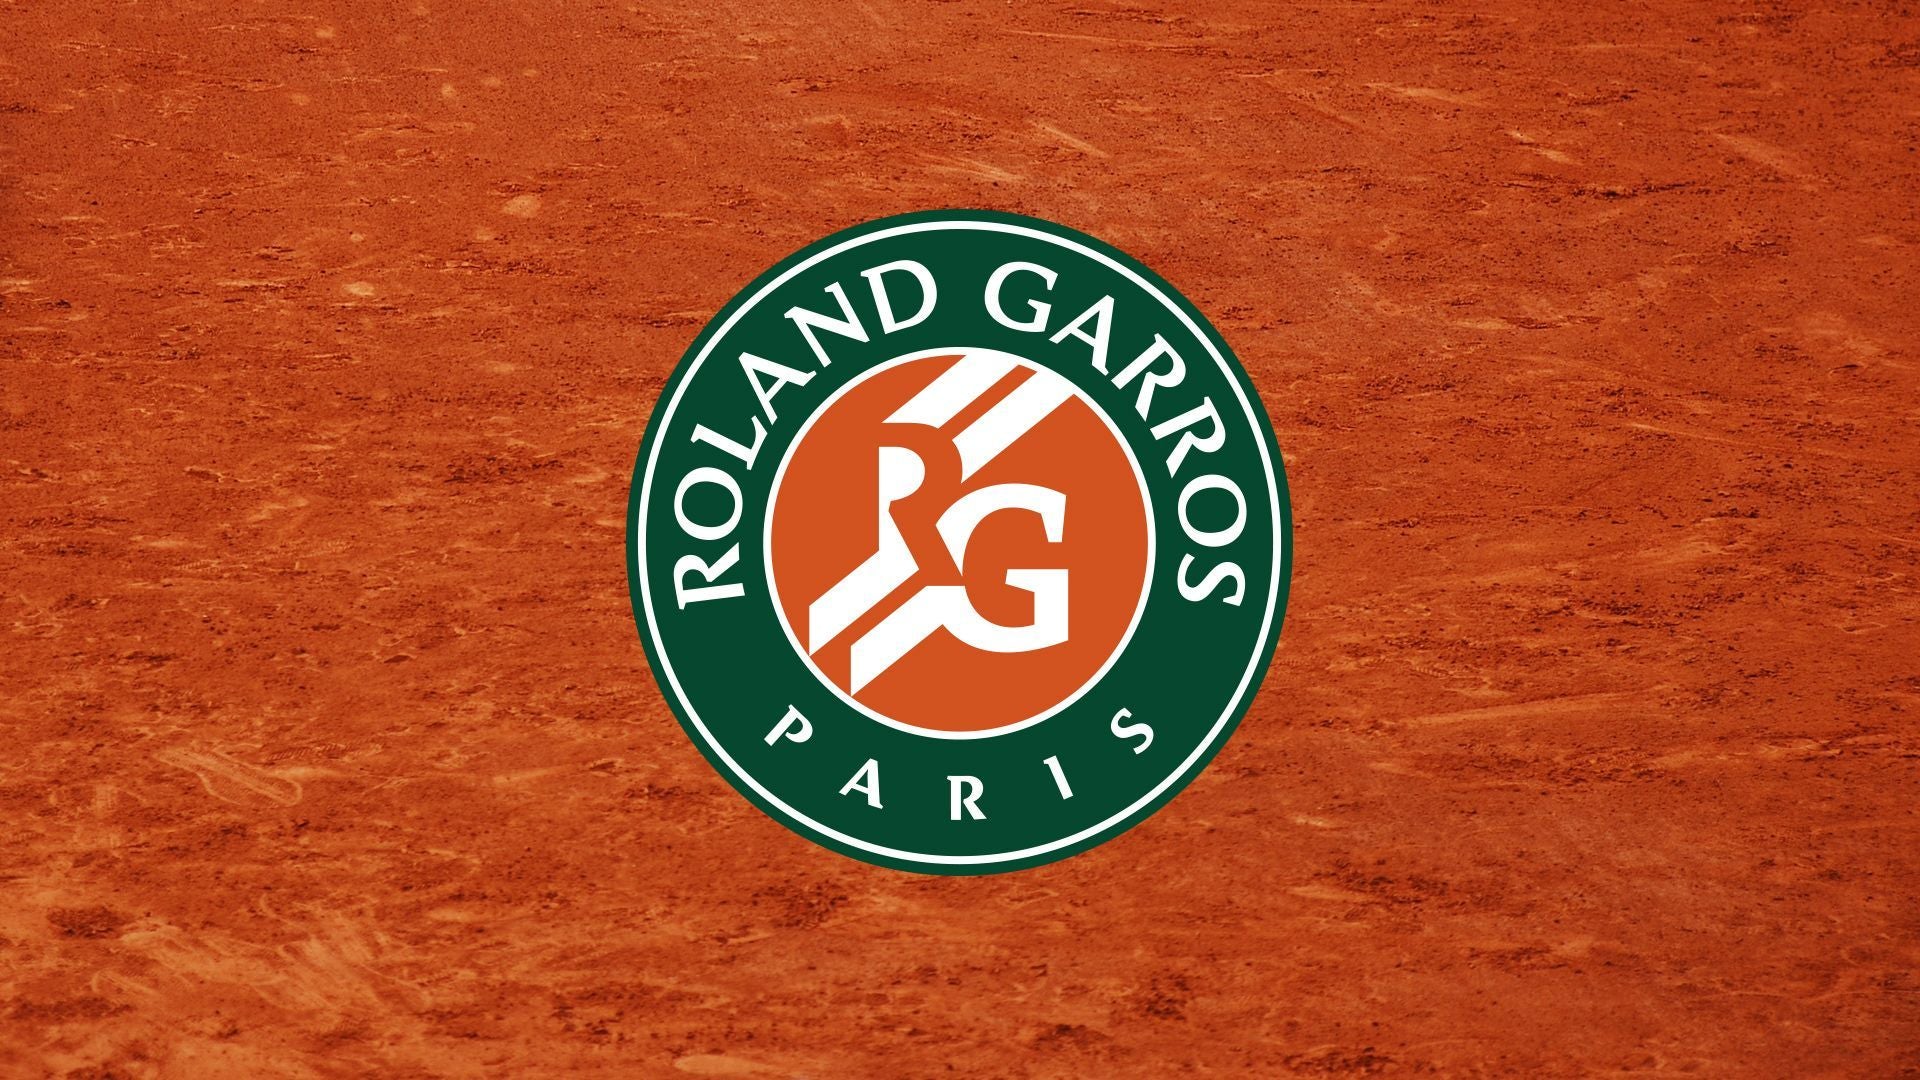 The 2022 French Open